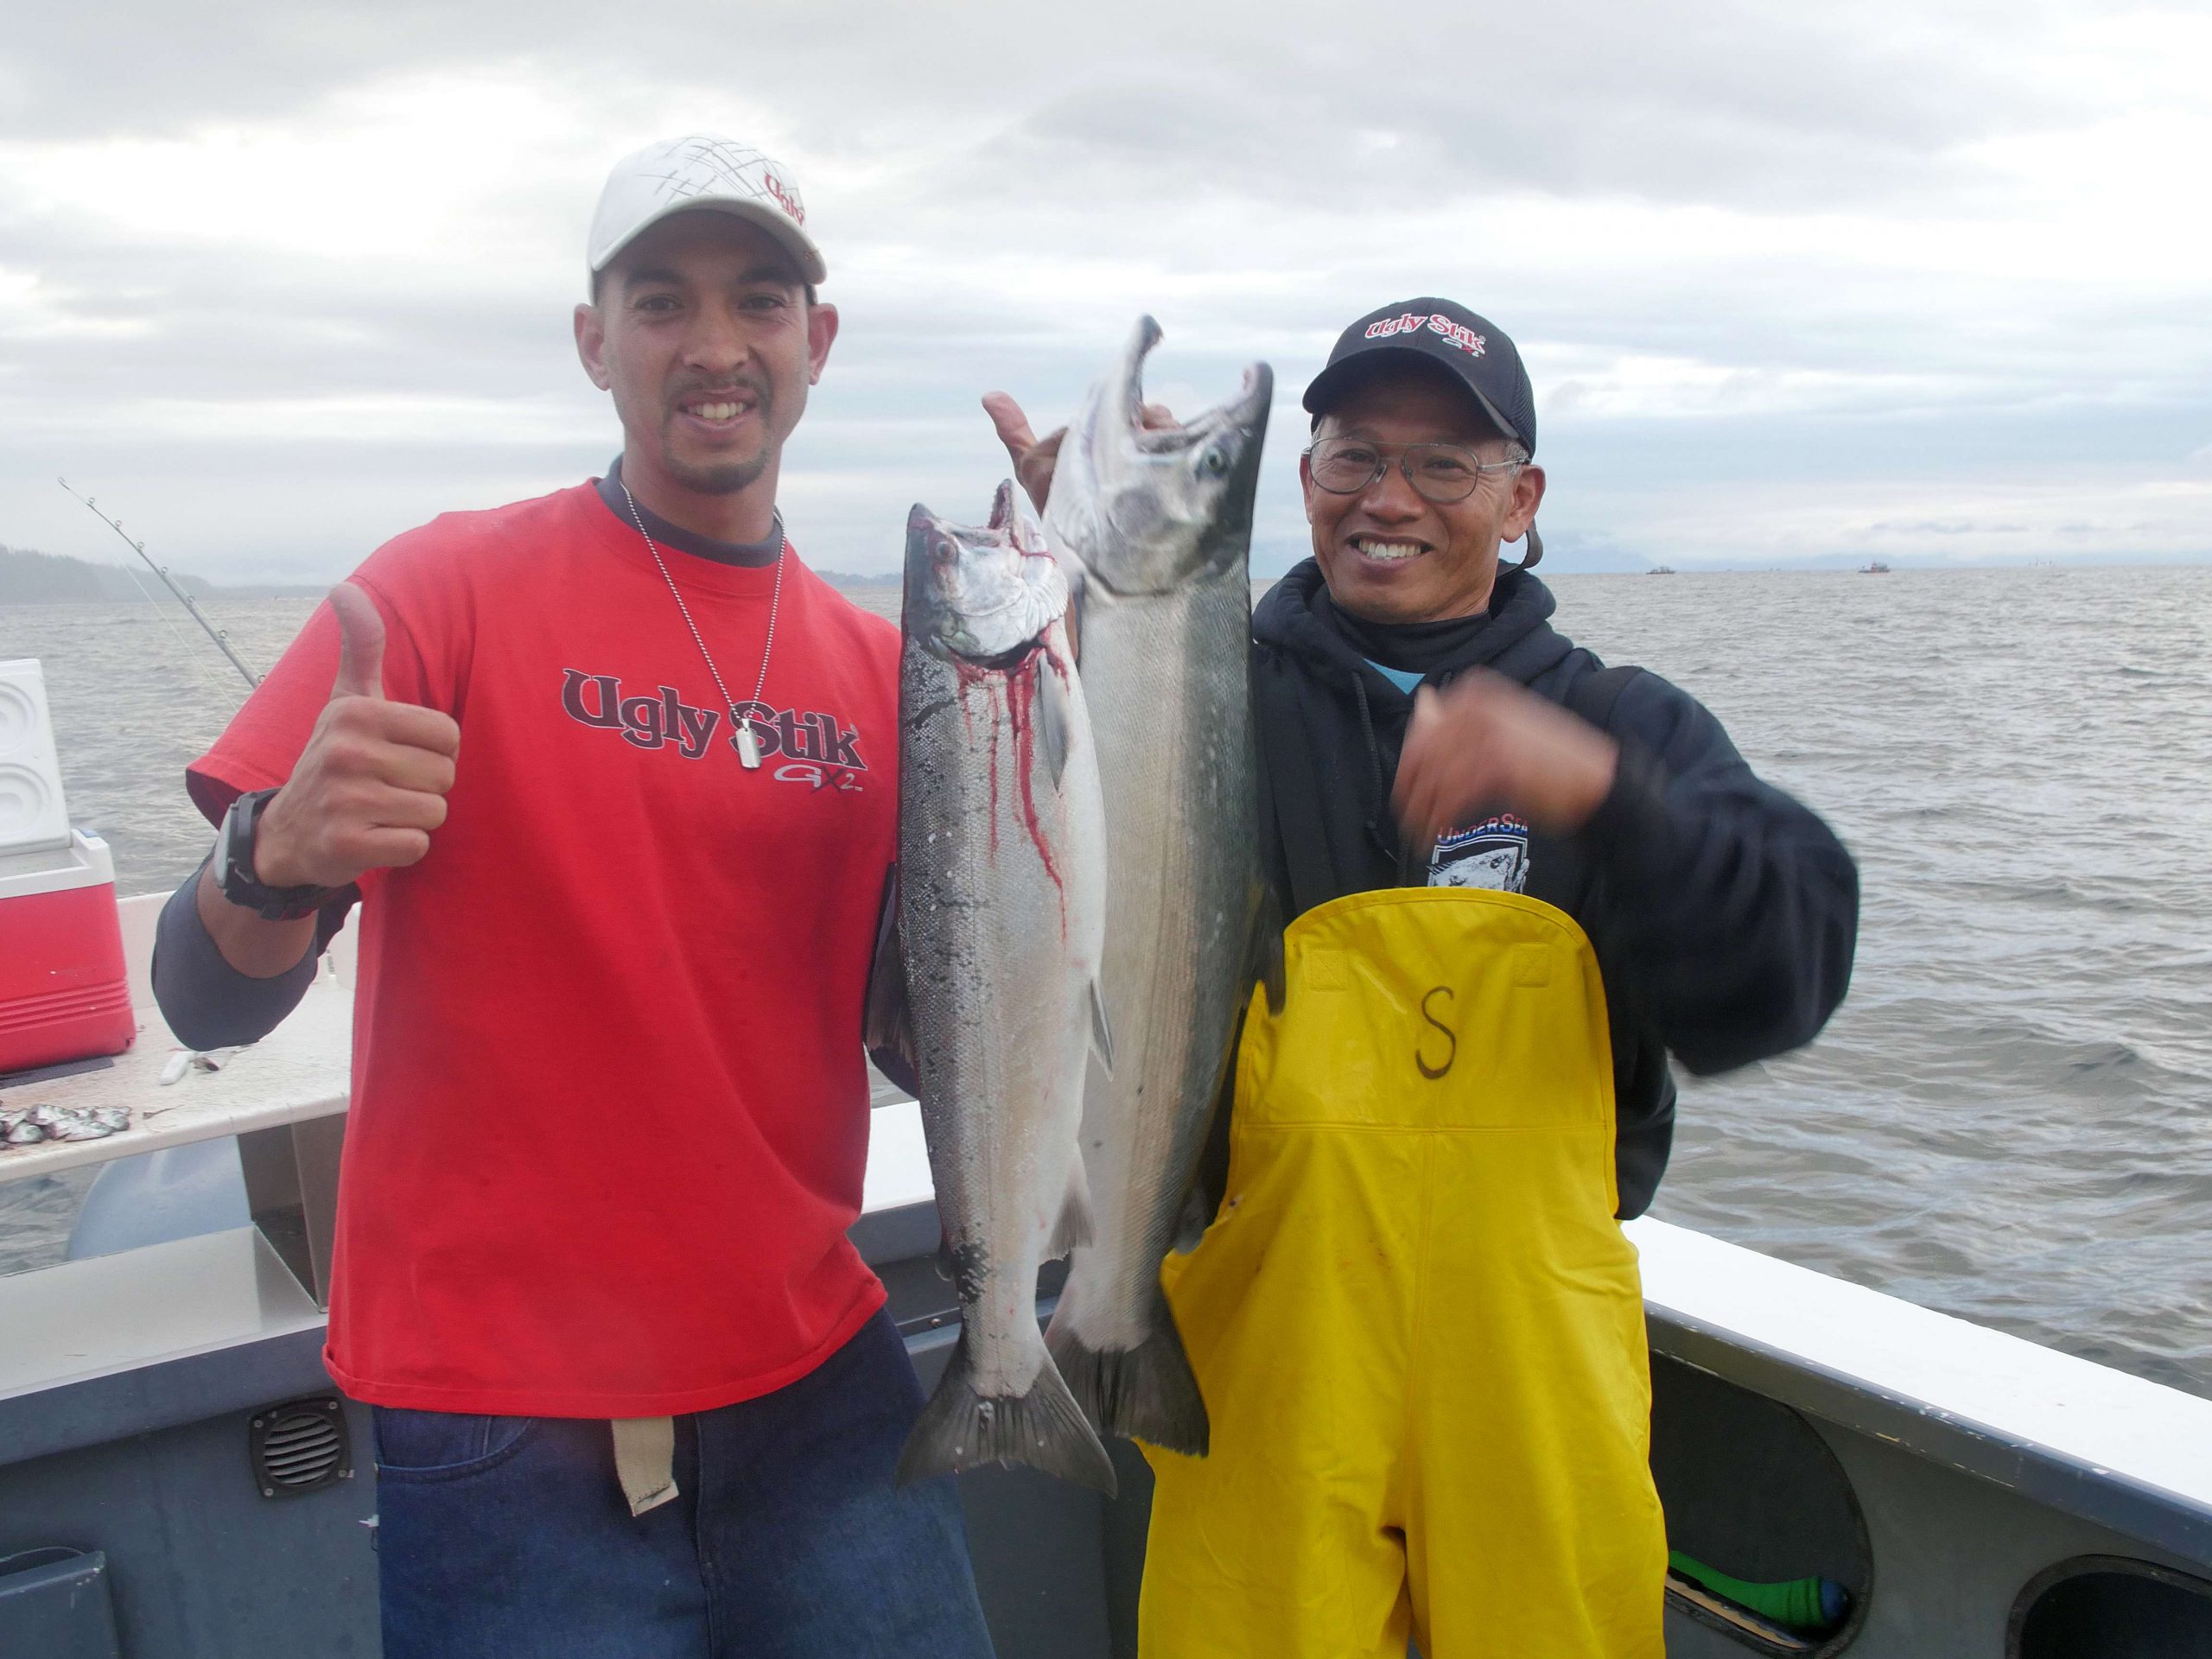 Chris Pascua and his dad Vito holding up their salmon on the way to limiting out for the day.